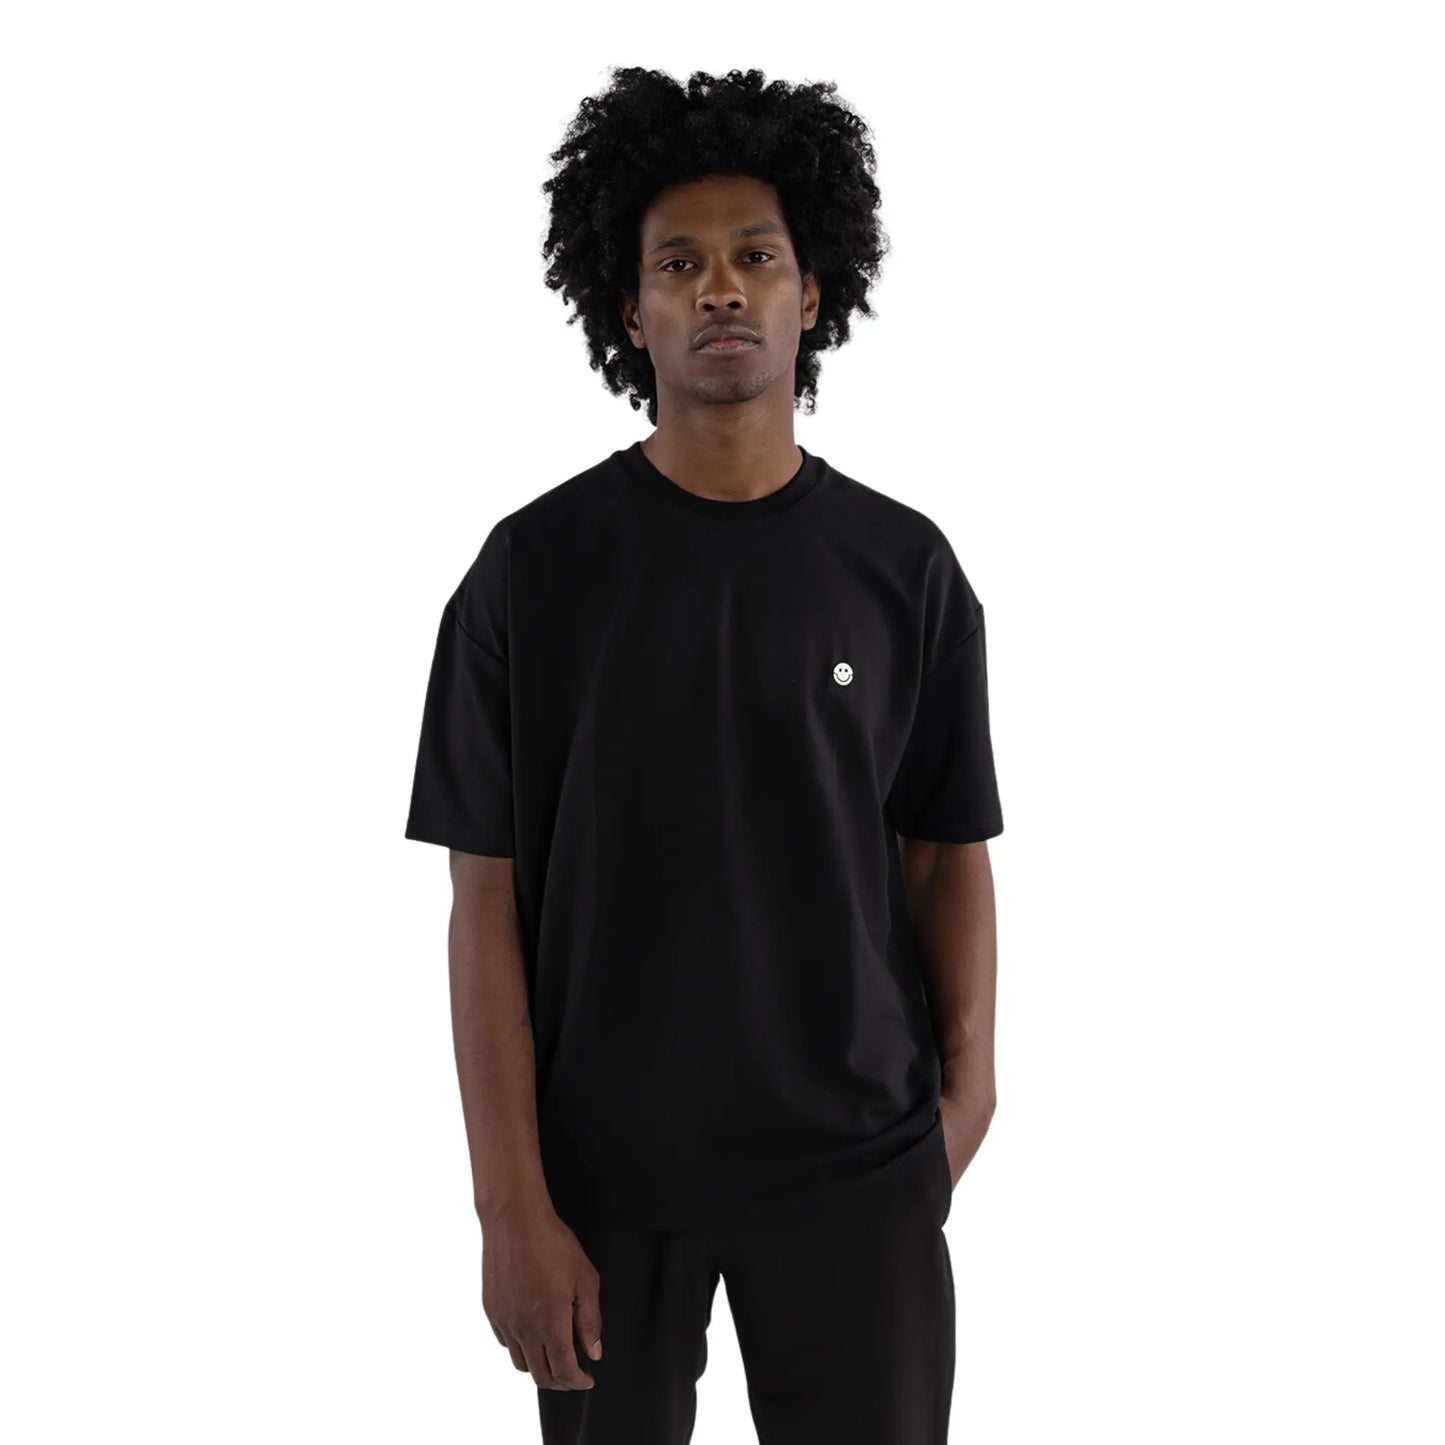 Oversized T-shirt Black worn by black man front close up view